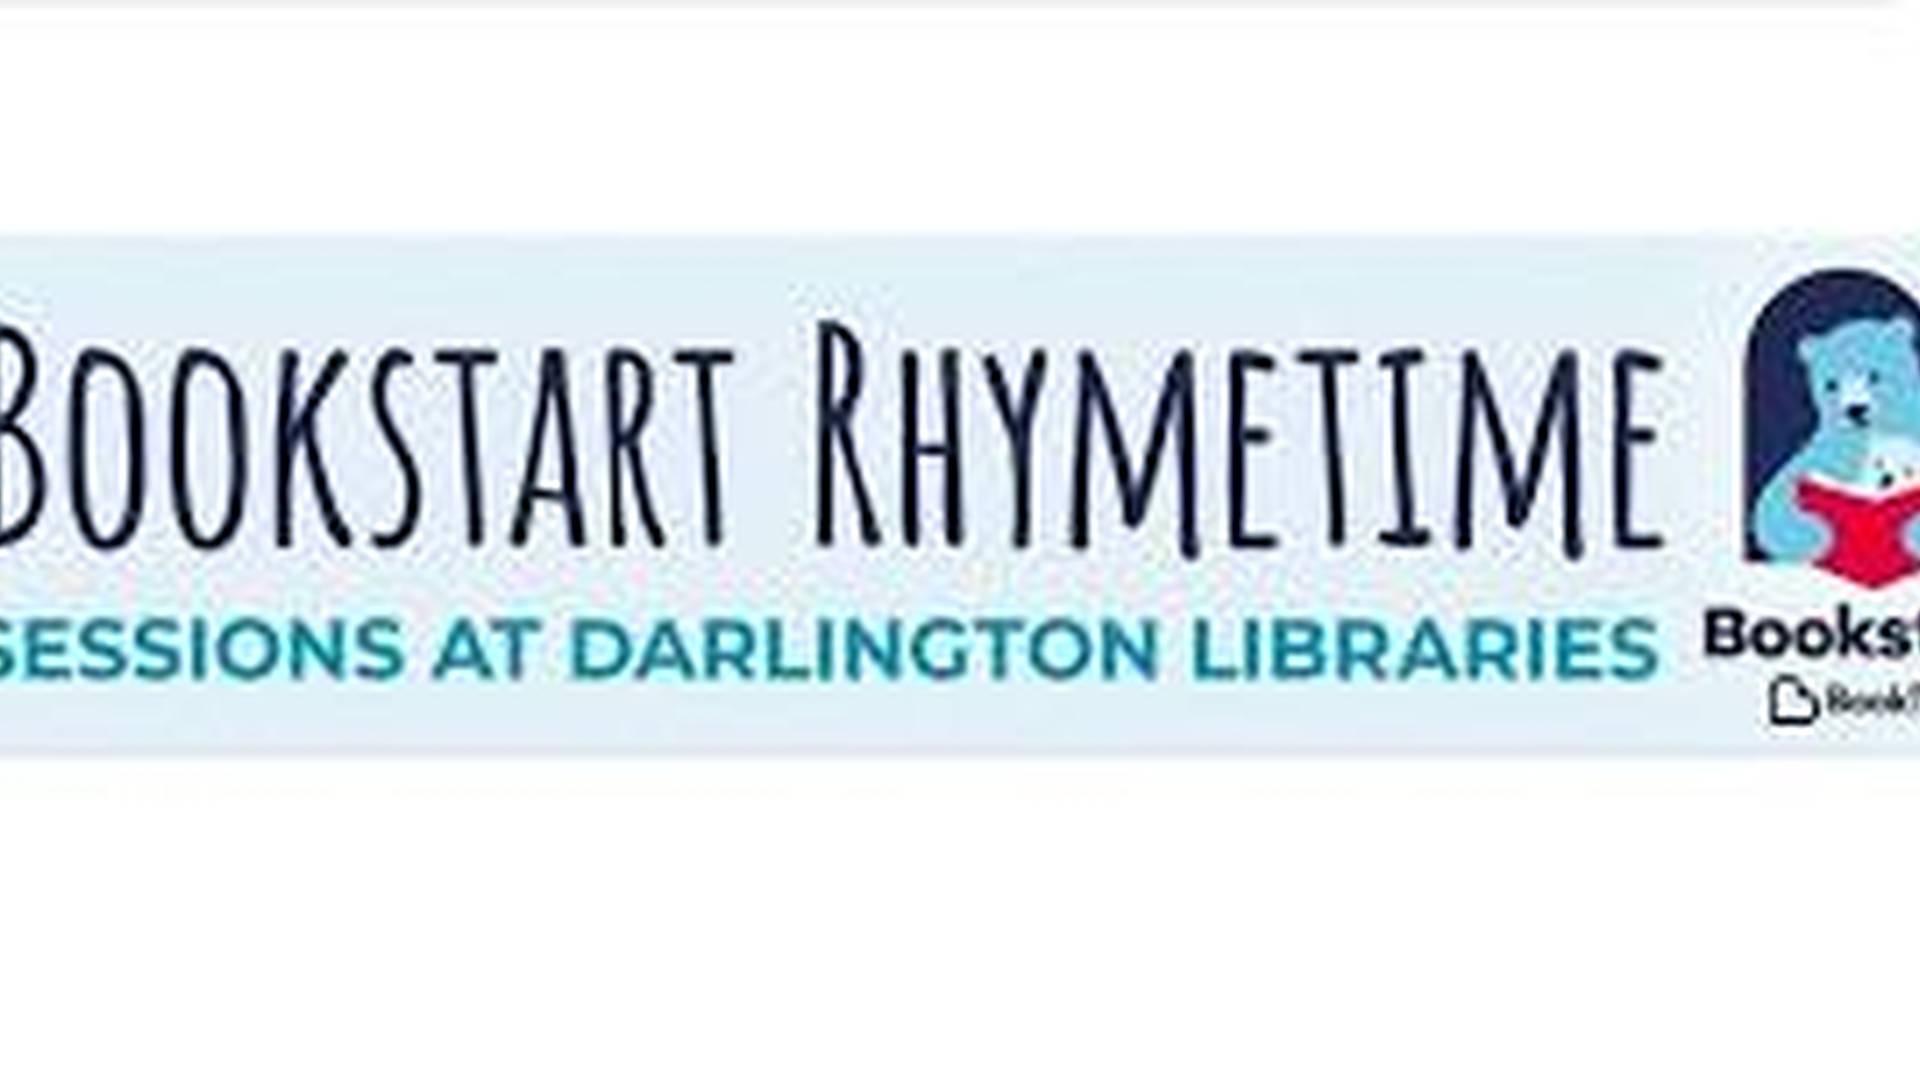 Bookstart Baby Rhymetimes @ Cockerton Library for 0 - 1 Year Olds (Tuesday) photo